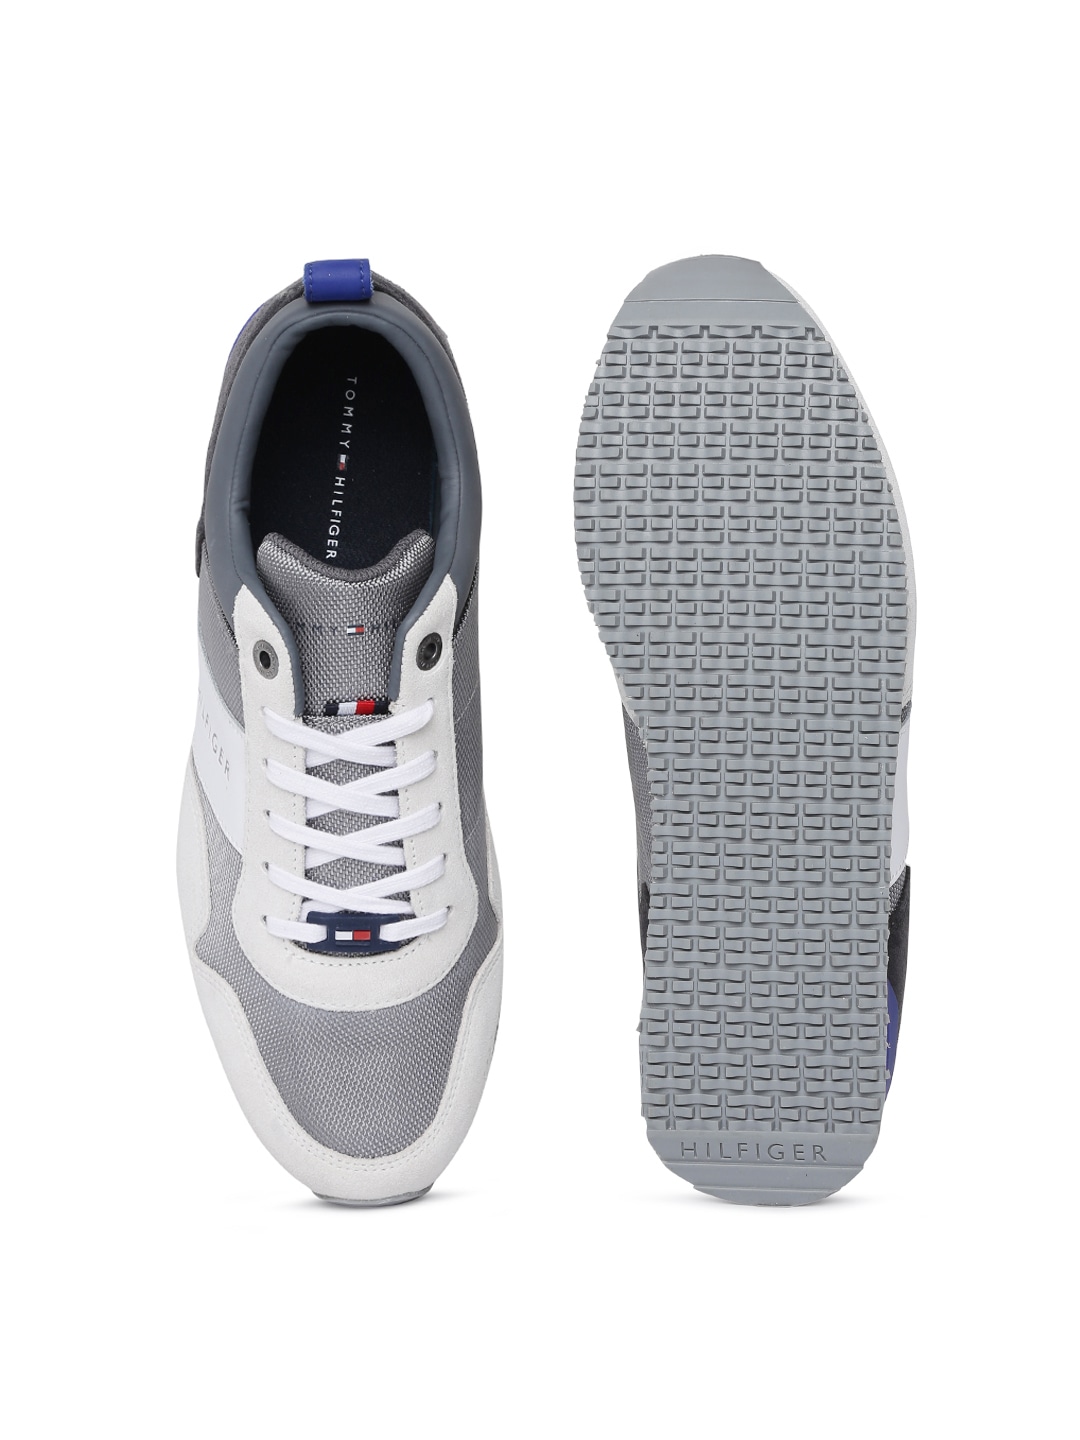 Tommy Hilfiger
Men Off-White & Grey Leather Sneakers